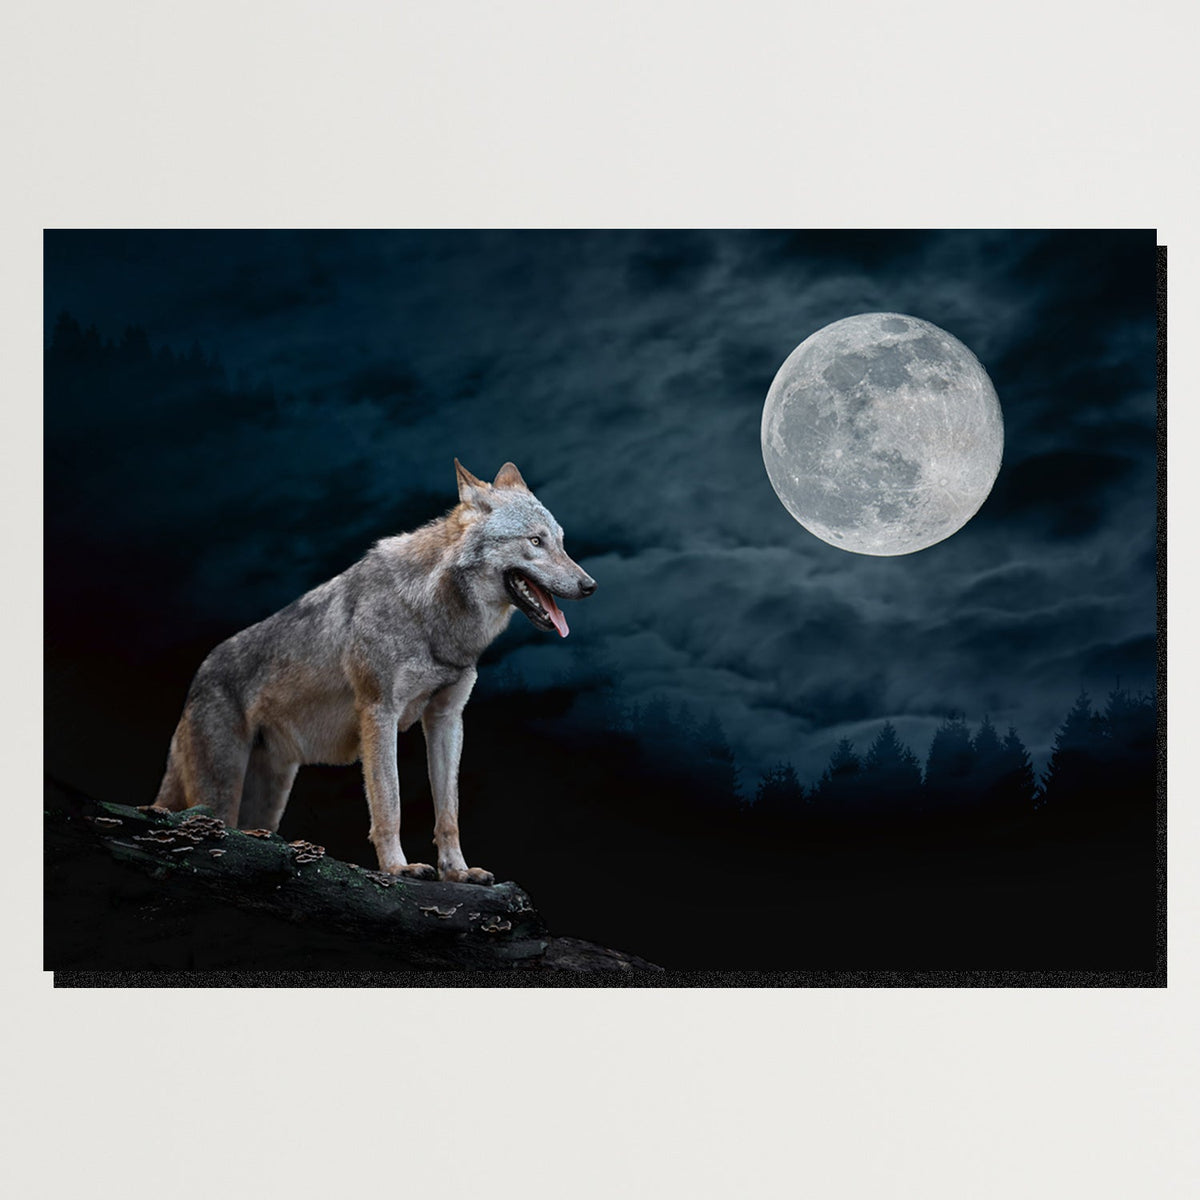 https://cdn.shopify.com/s/files/1/0387/9986/8044/products/NightWolfCanvasArtprintStretched-Plain.jpg